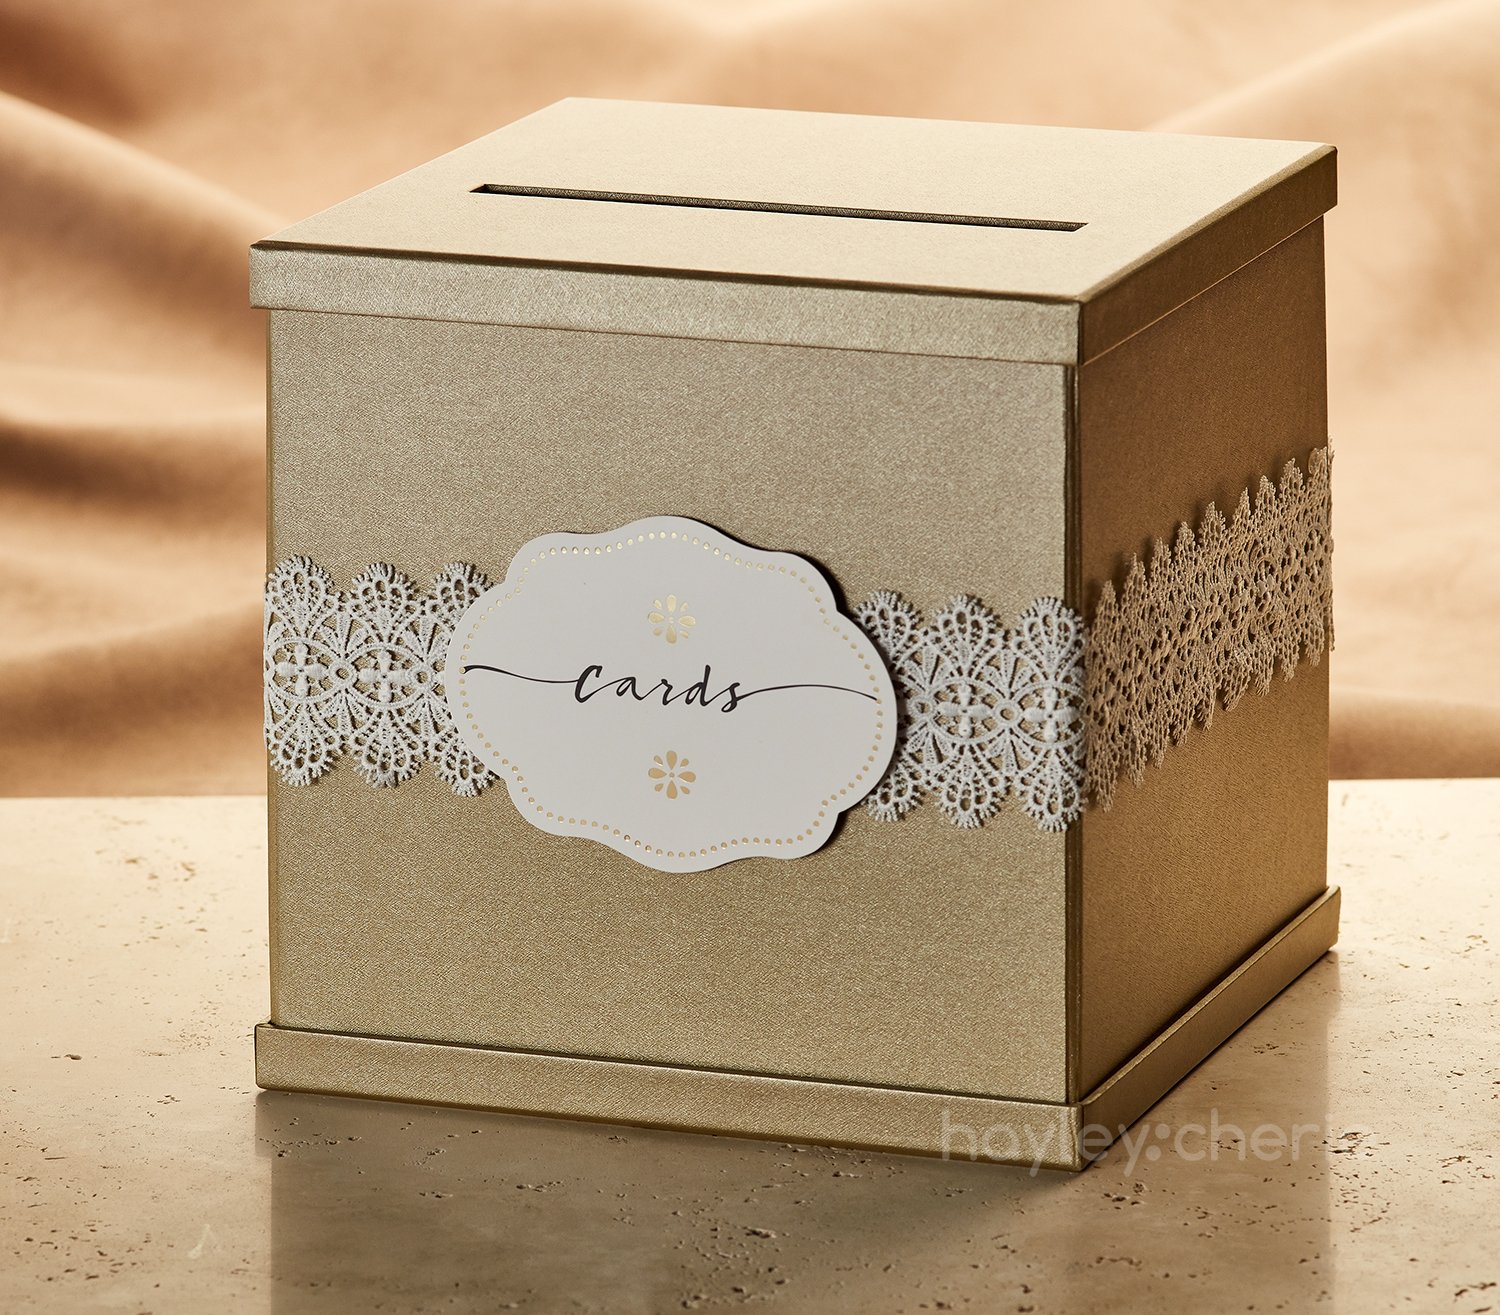 Merry Expressions Gold Gift Card Box with White/Gold-Foil Satin Ribbon & Cards Label - 10x10 Large Textured Finish, Perfect for Wedding Receptions